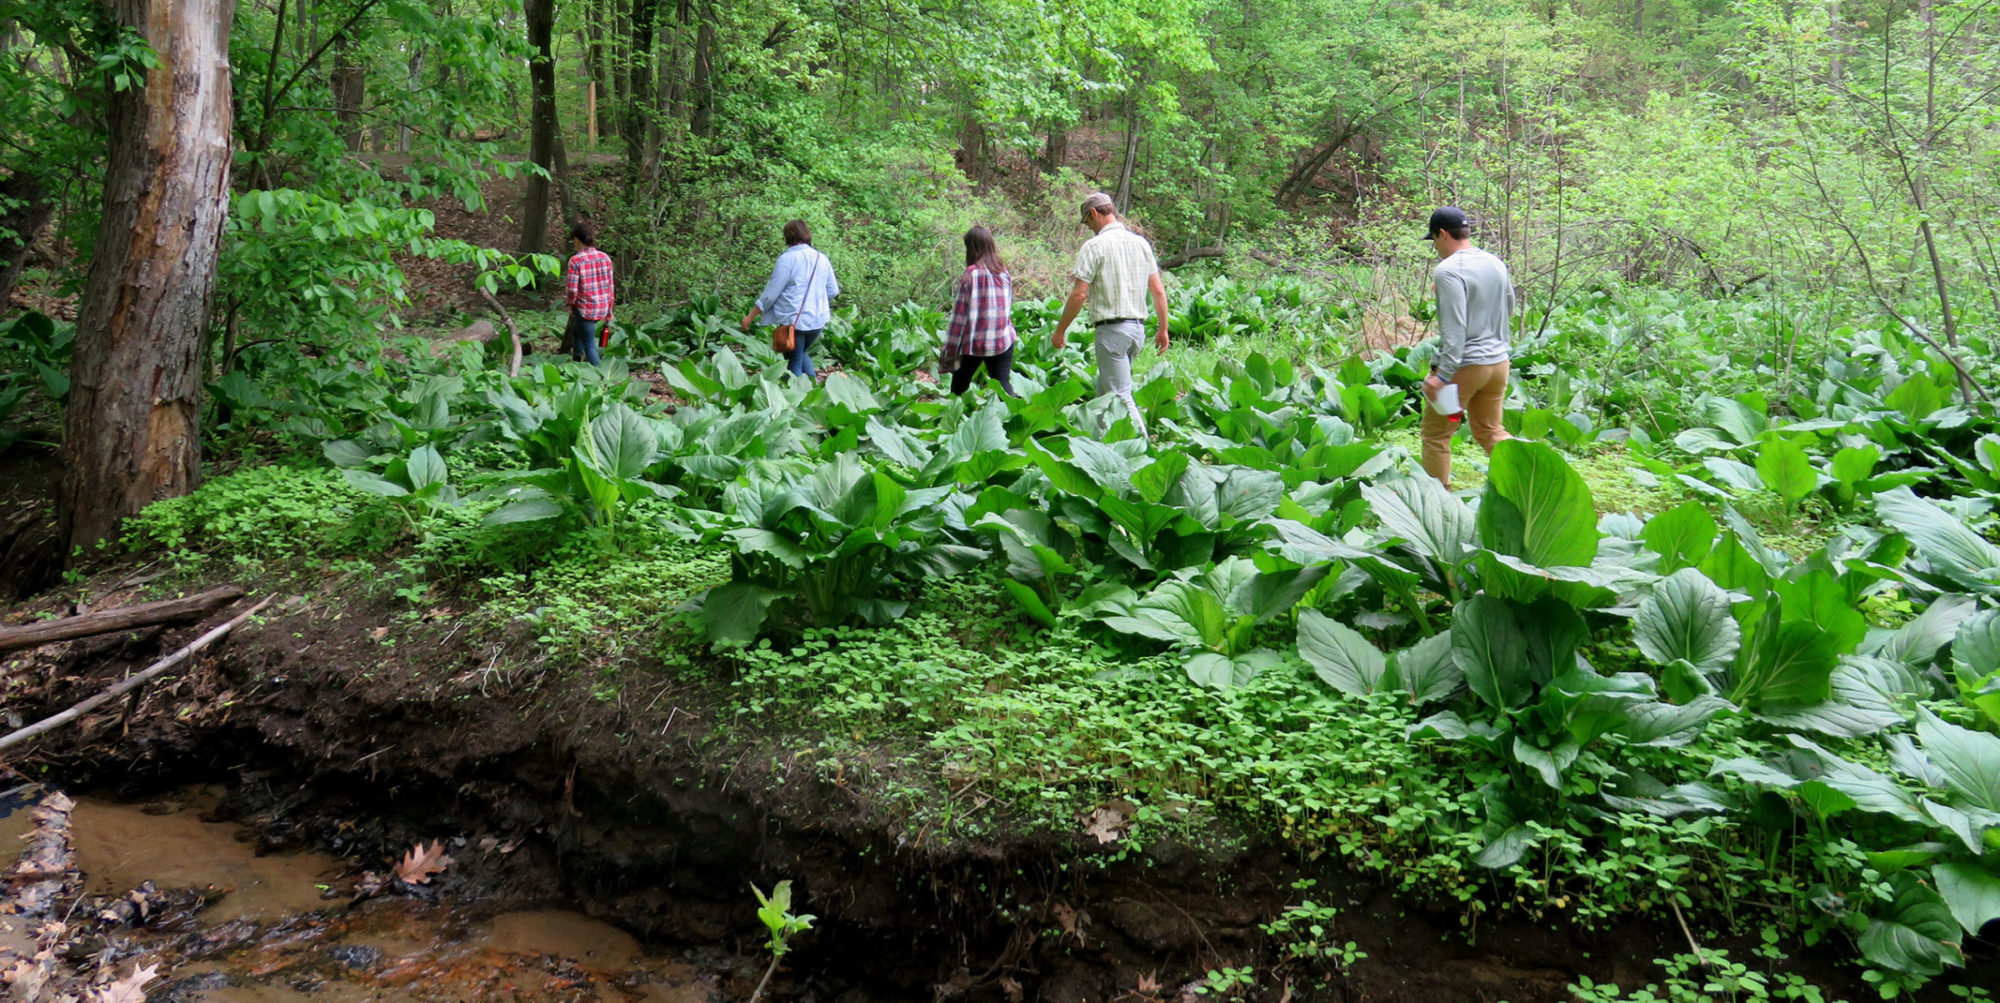 RDG staff and interns walk through a field of skunk cabbage during an eco-cultural restoration intensive.